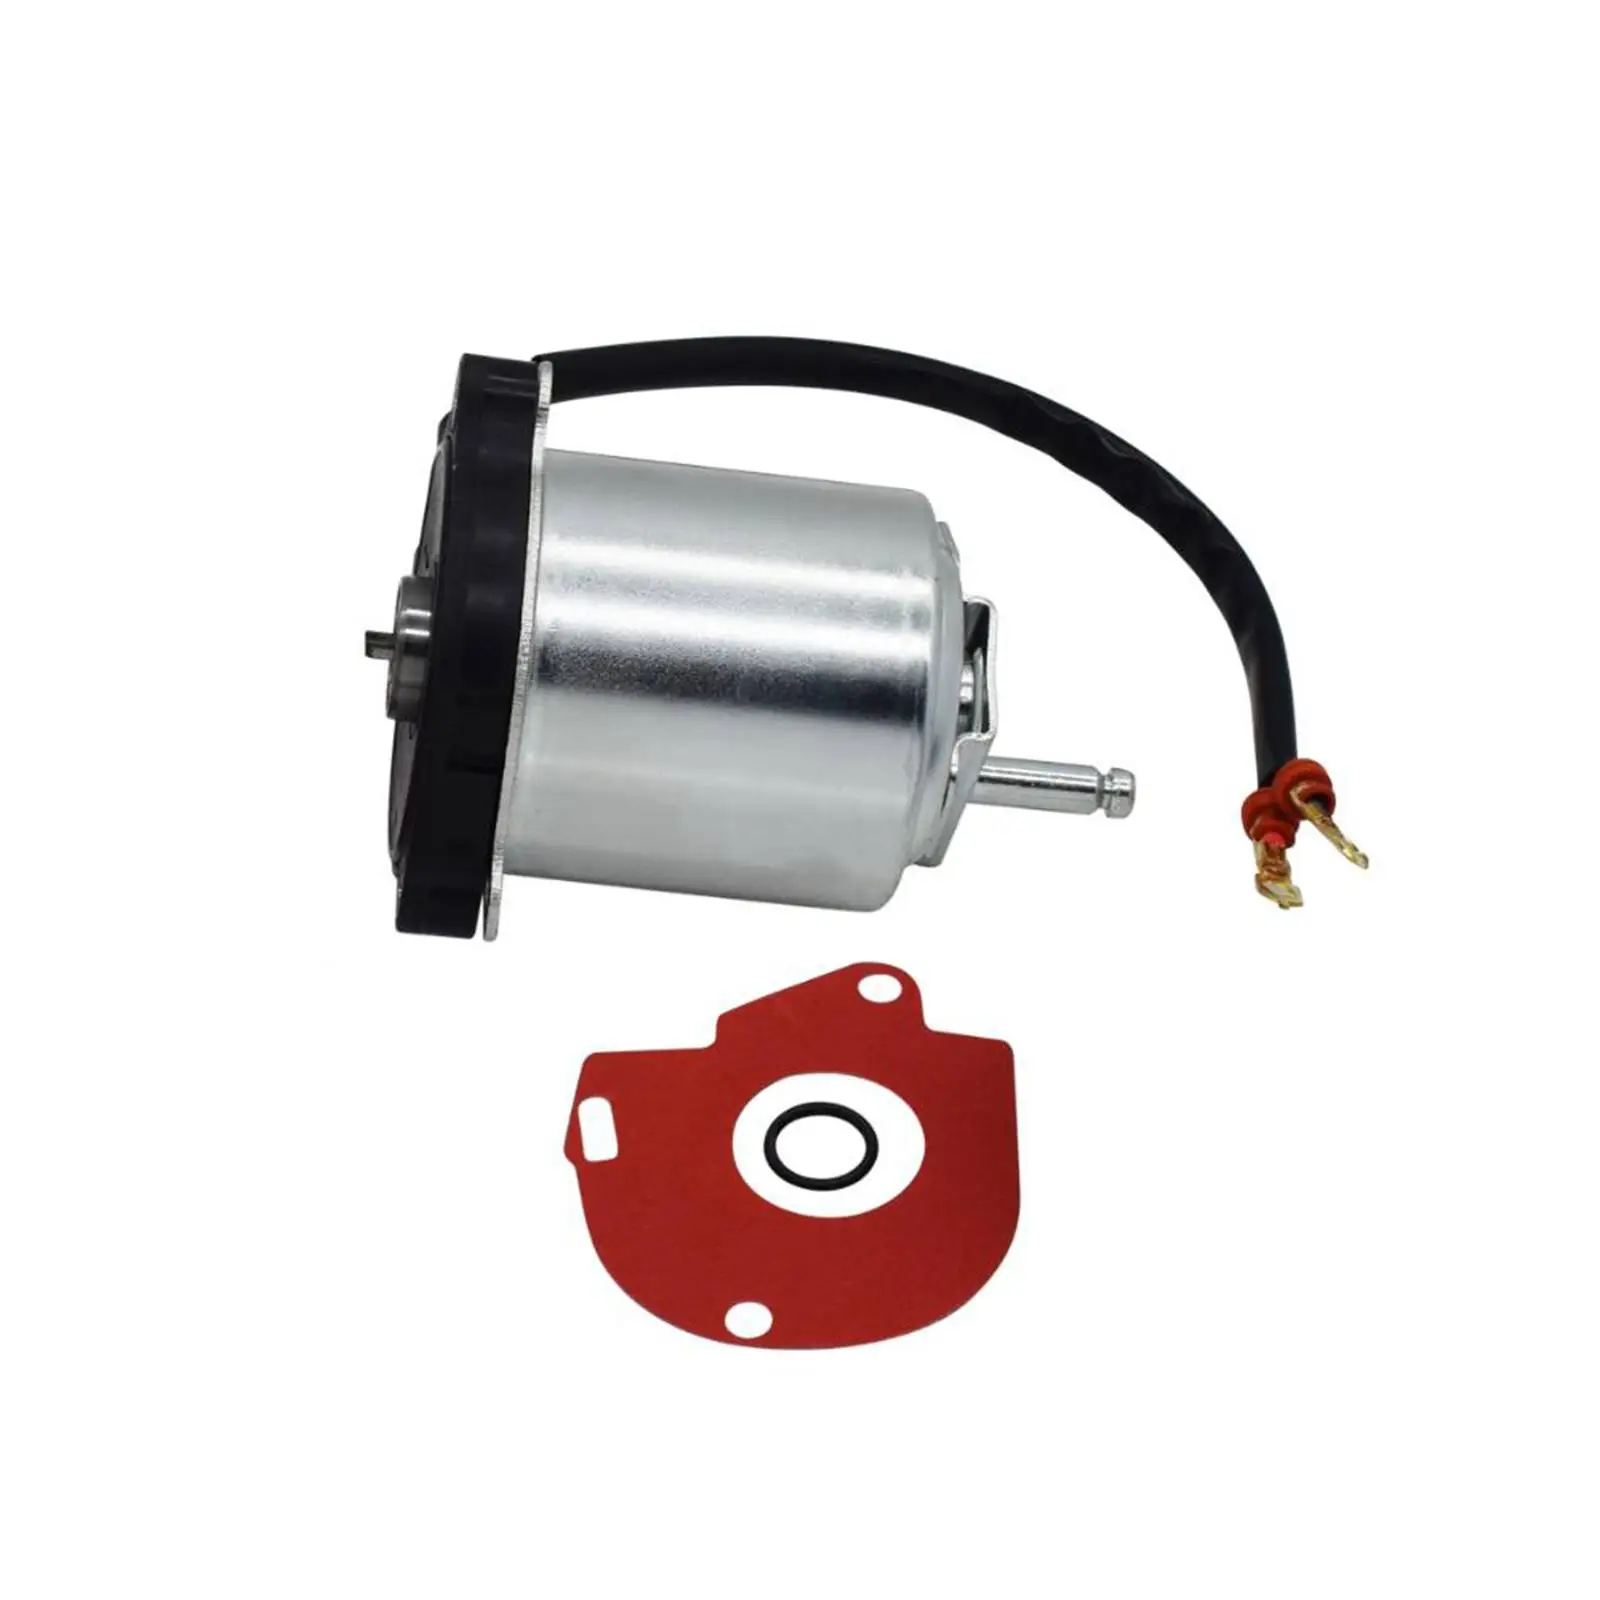 ABS Brake Booster Pump Motor Assembly 4796060050 Easy to Install Directly Replace for Toyota LX570 LX450D Gx470 FJ Cruiser